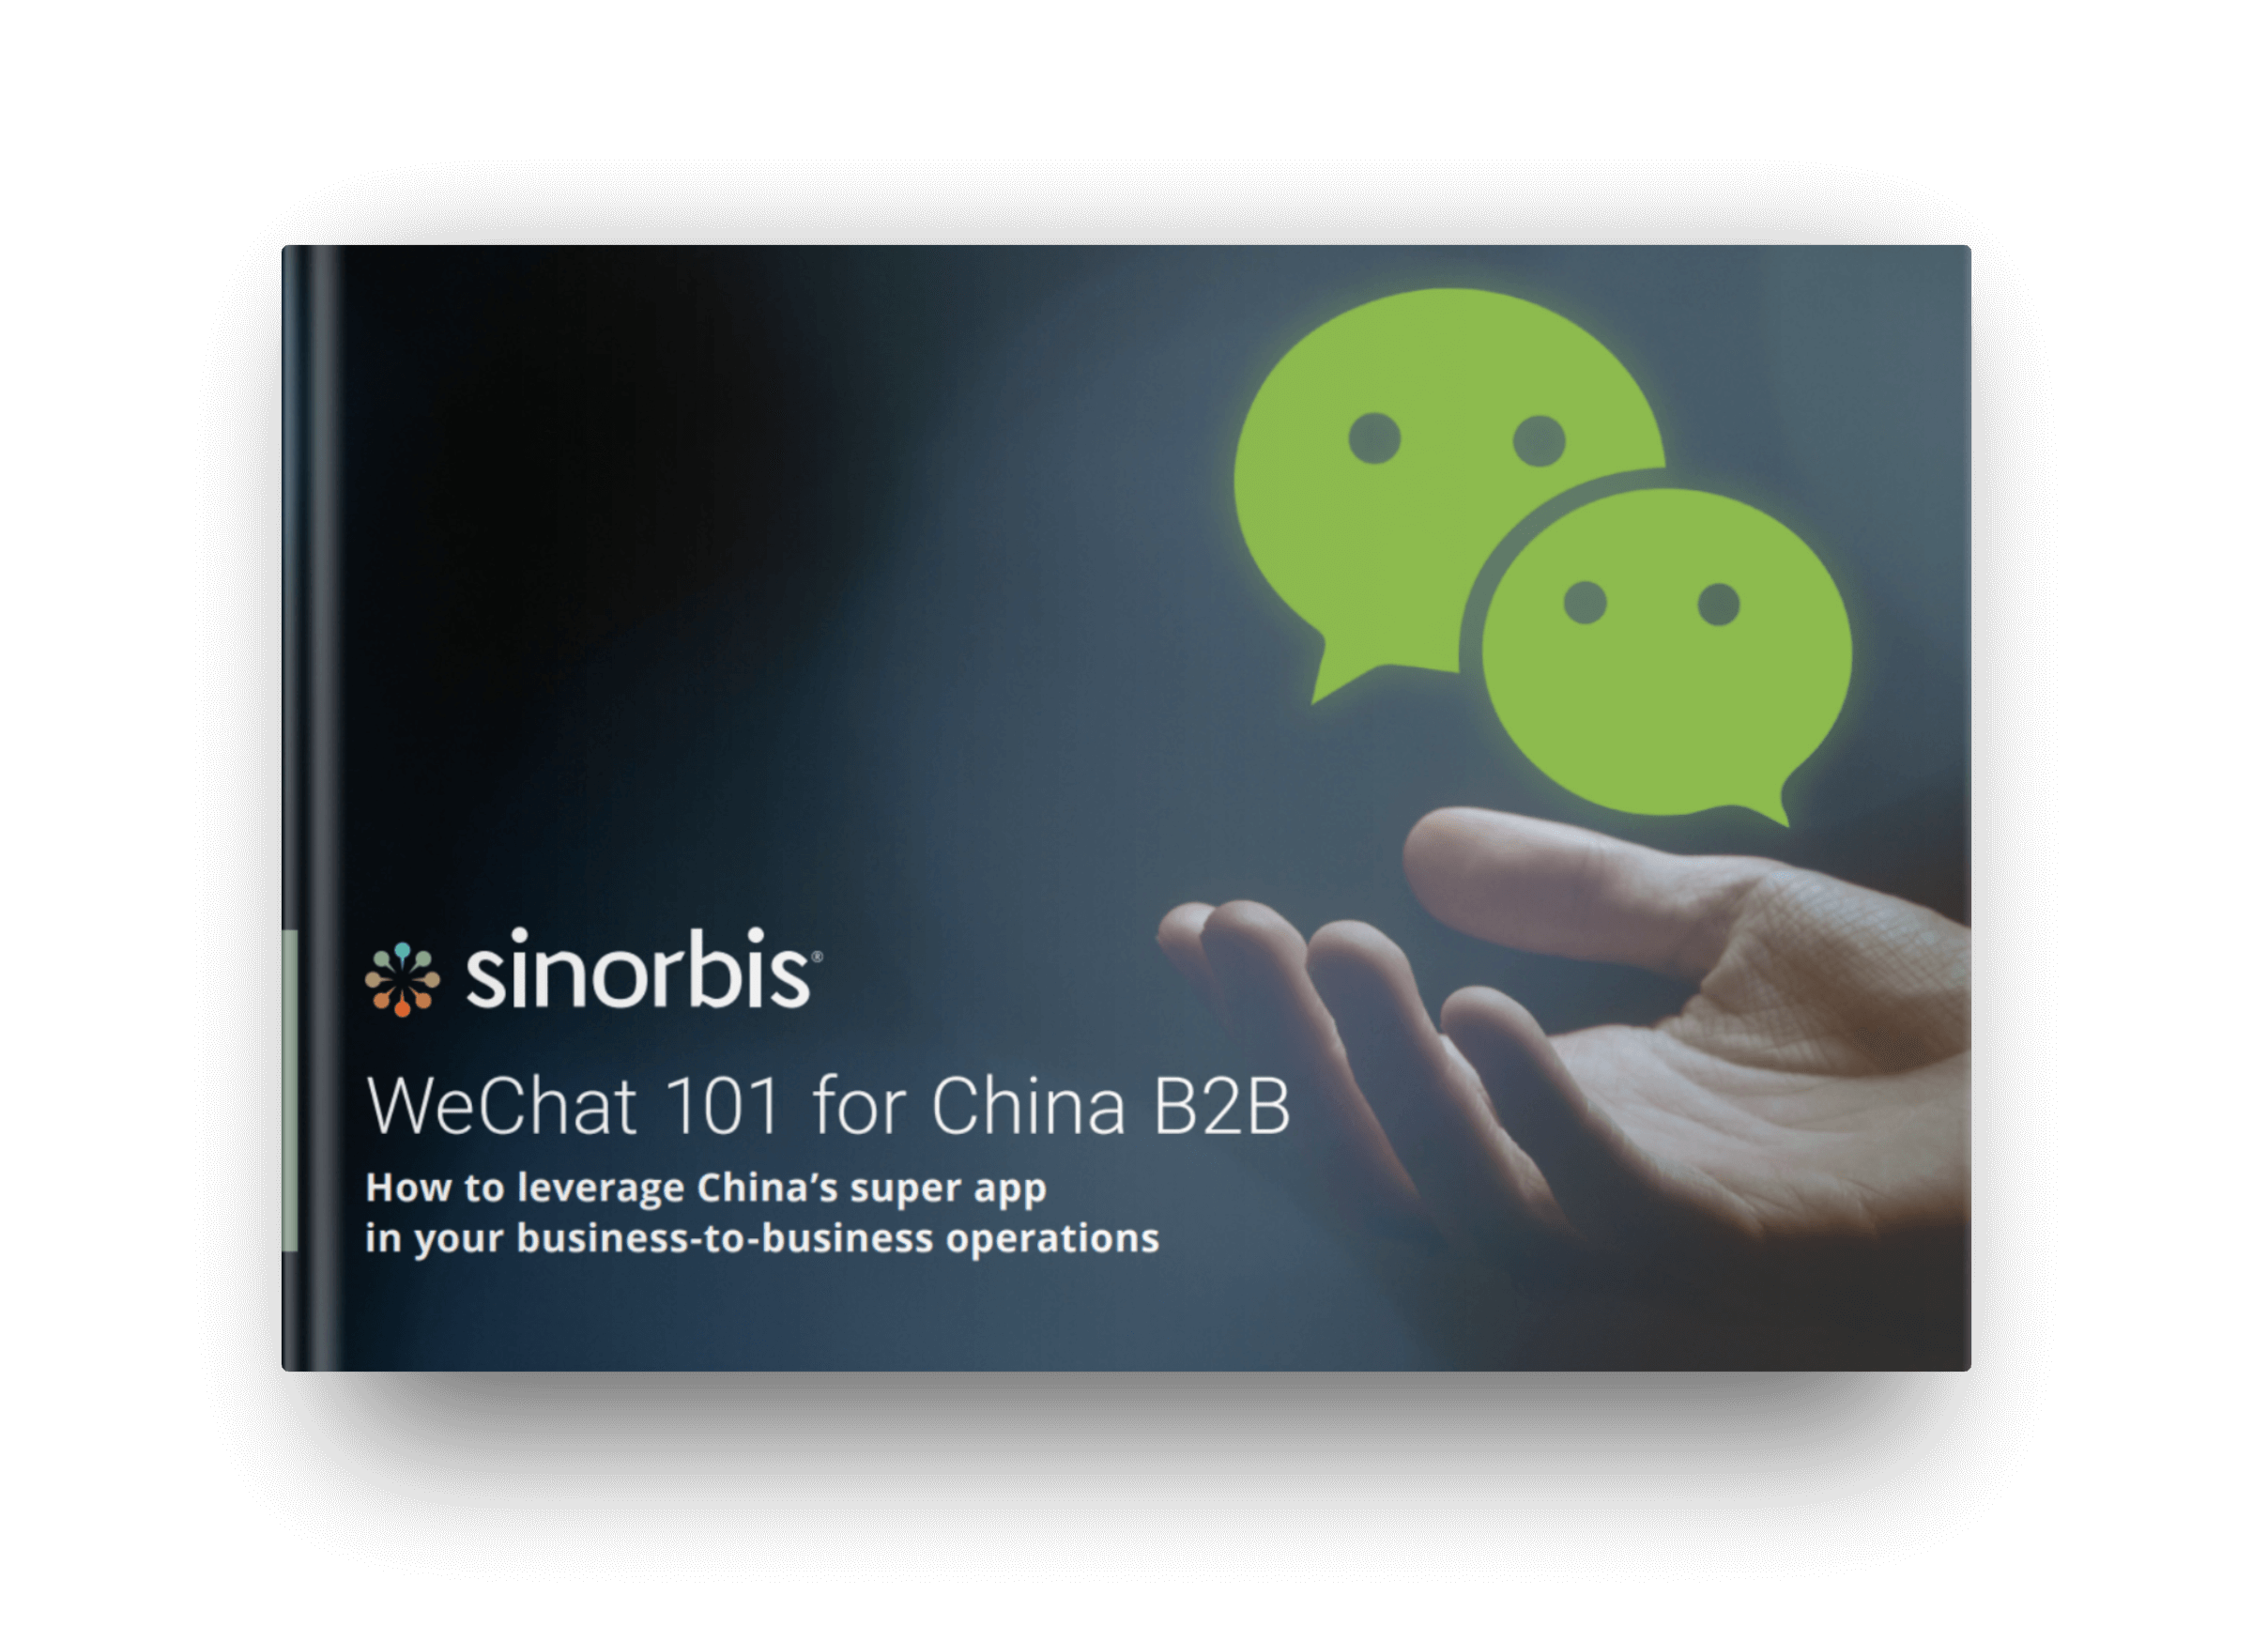 WeChat 101 for China B2B